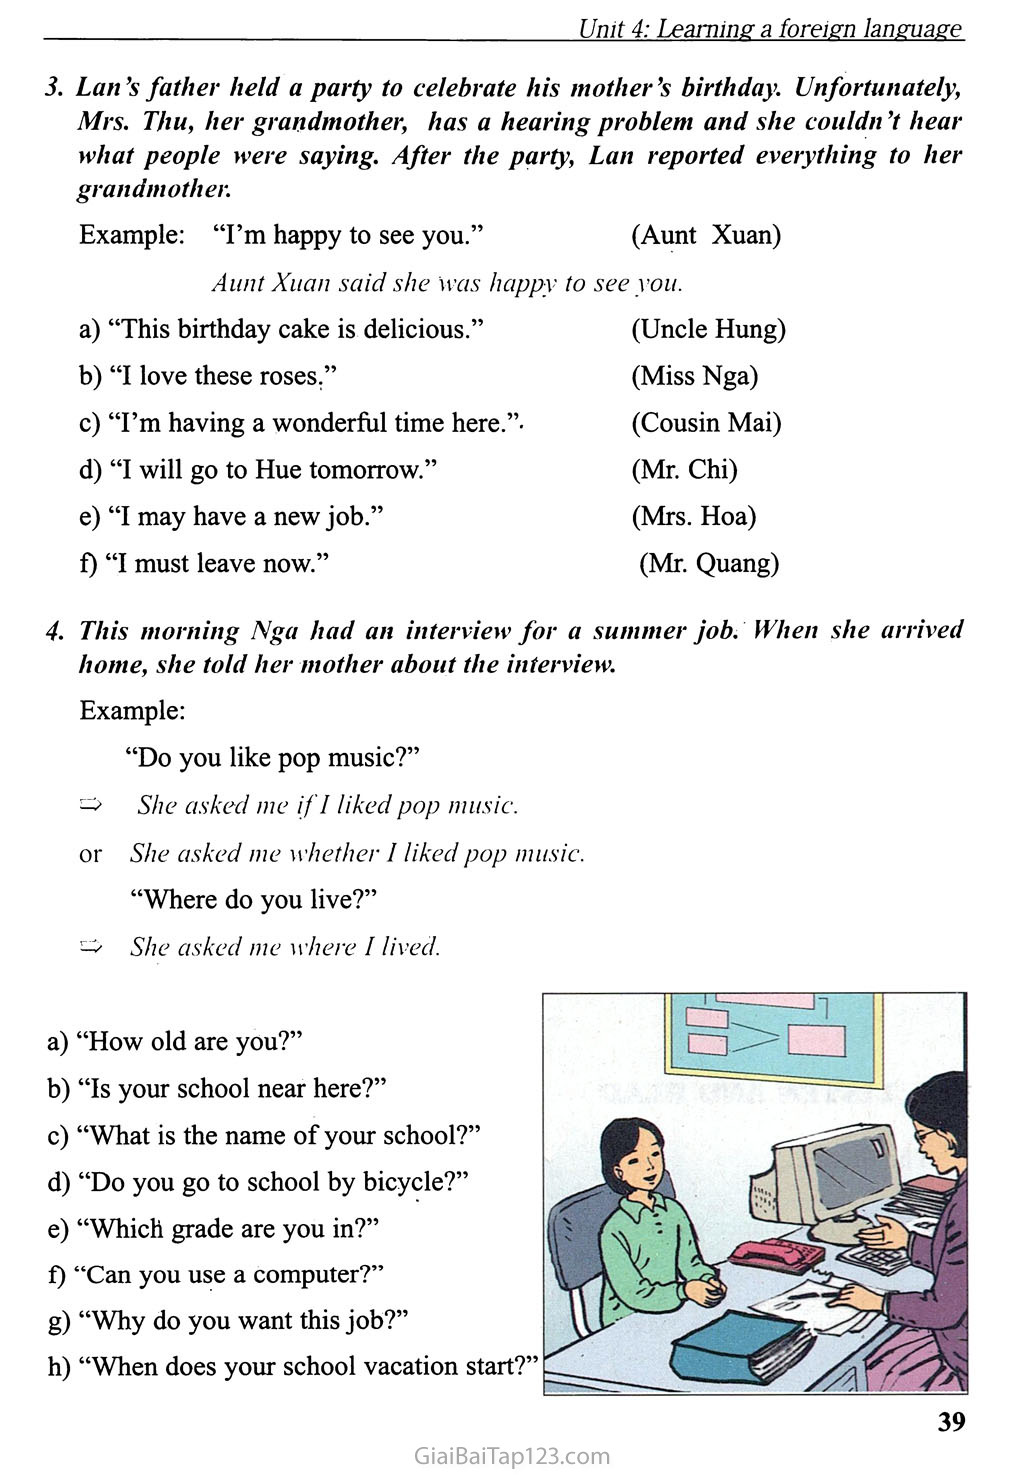 Unit 4: Learning a foreign language trang 8